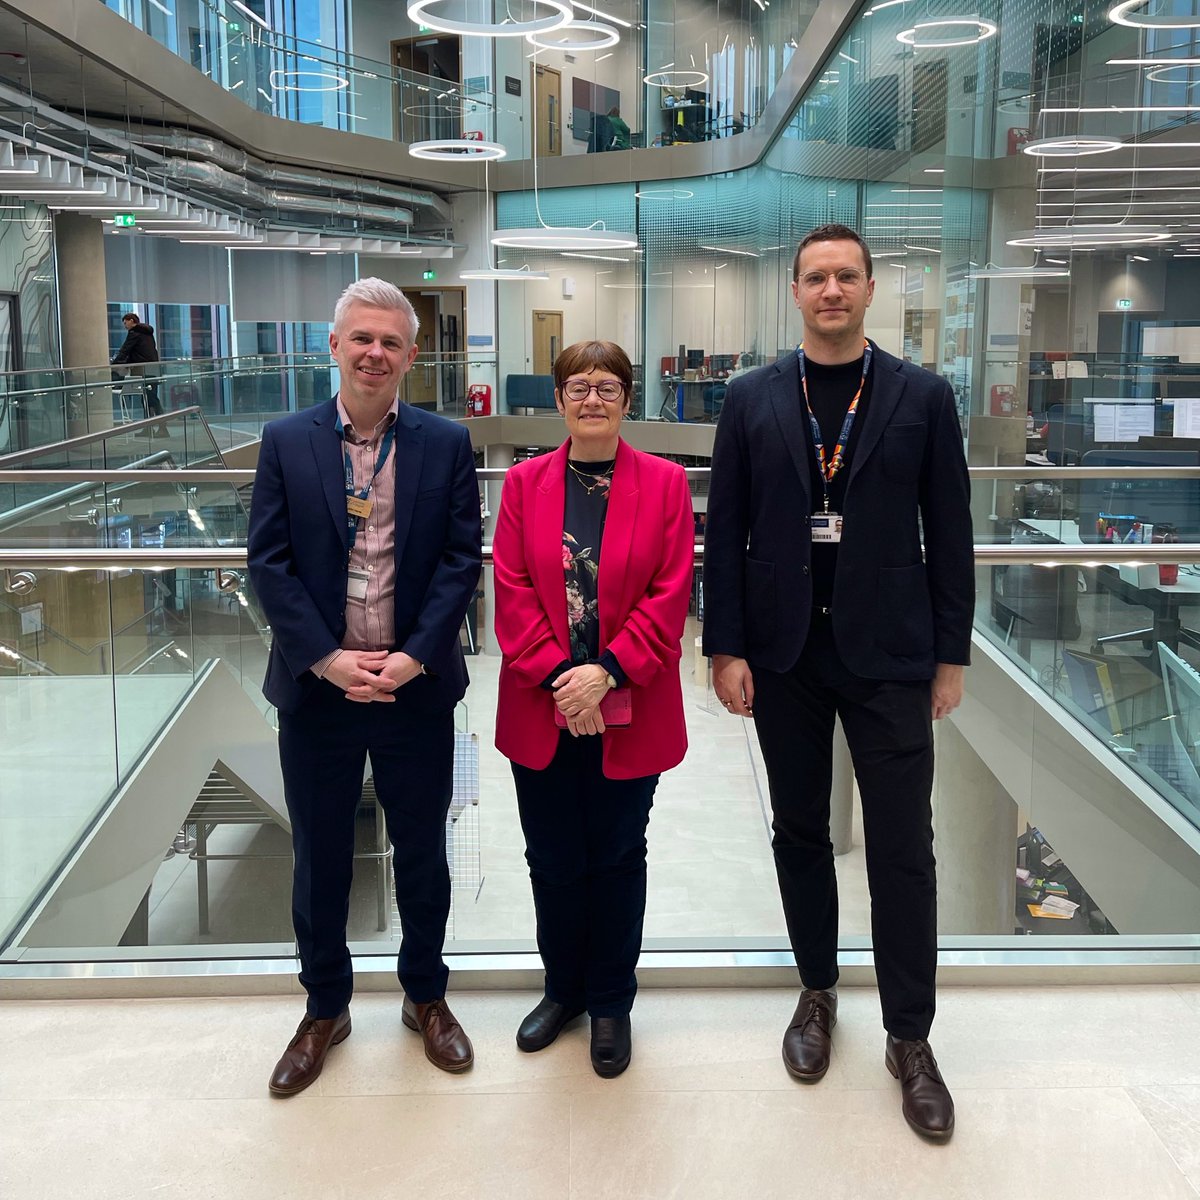 Delighted to have the opportunity to showcase @UofGARC to @SarahBoyack and team today, and to host a meeting on @UofGlasgow research, innovation and partnerships to accelerate Scotland’s just transition @GALLANT_GLA @UofGsustain @SCAF_ARC @UofGEnergy